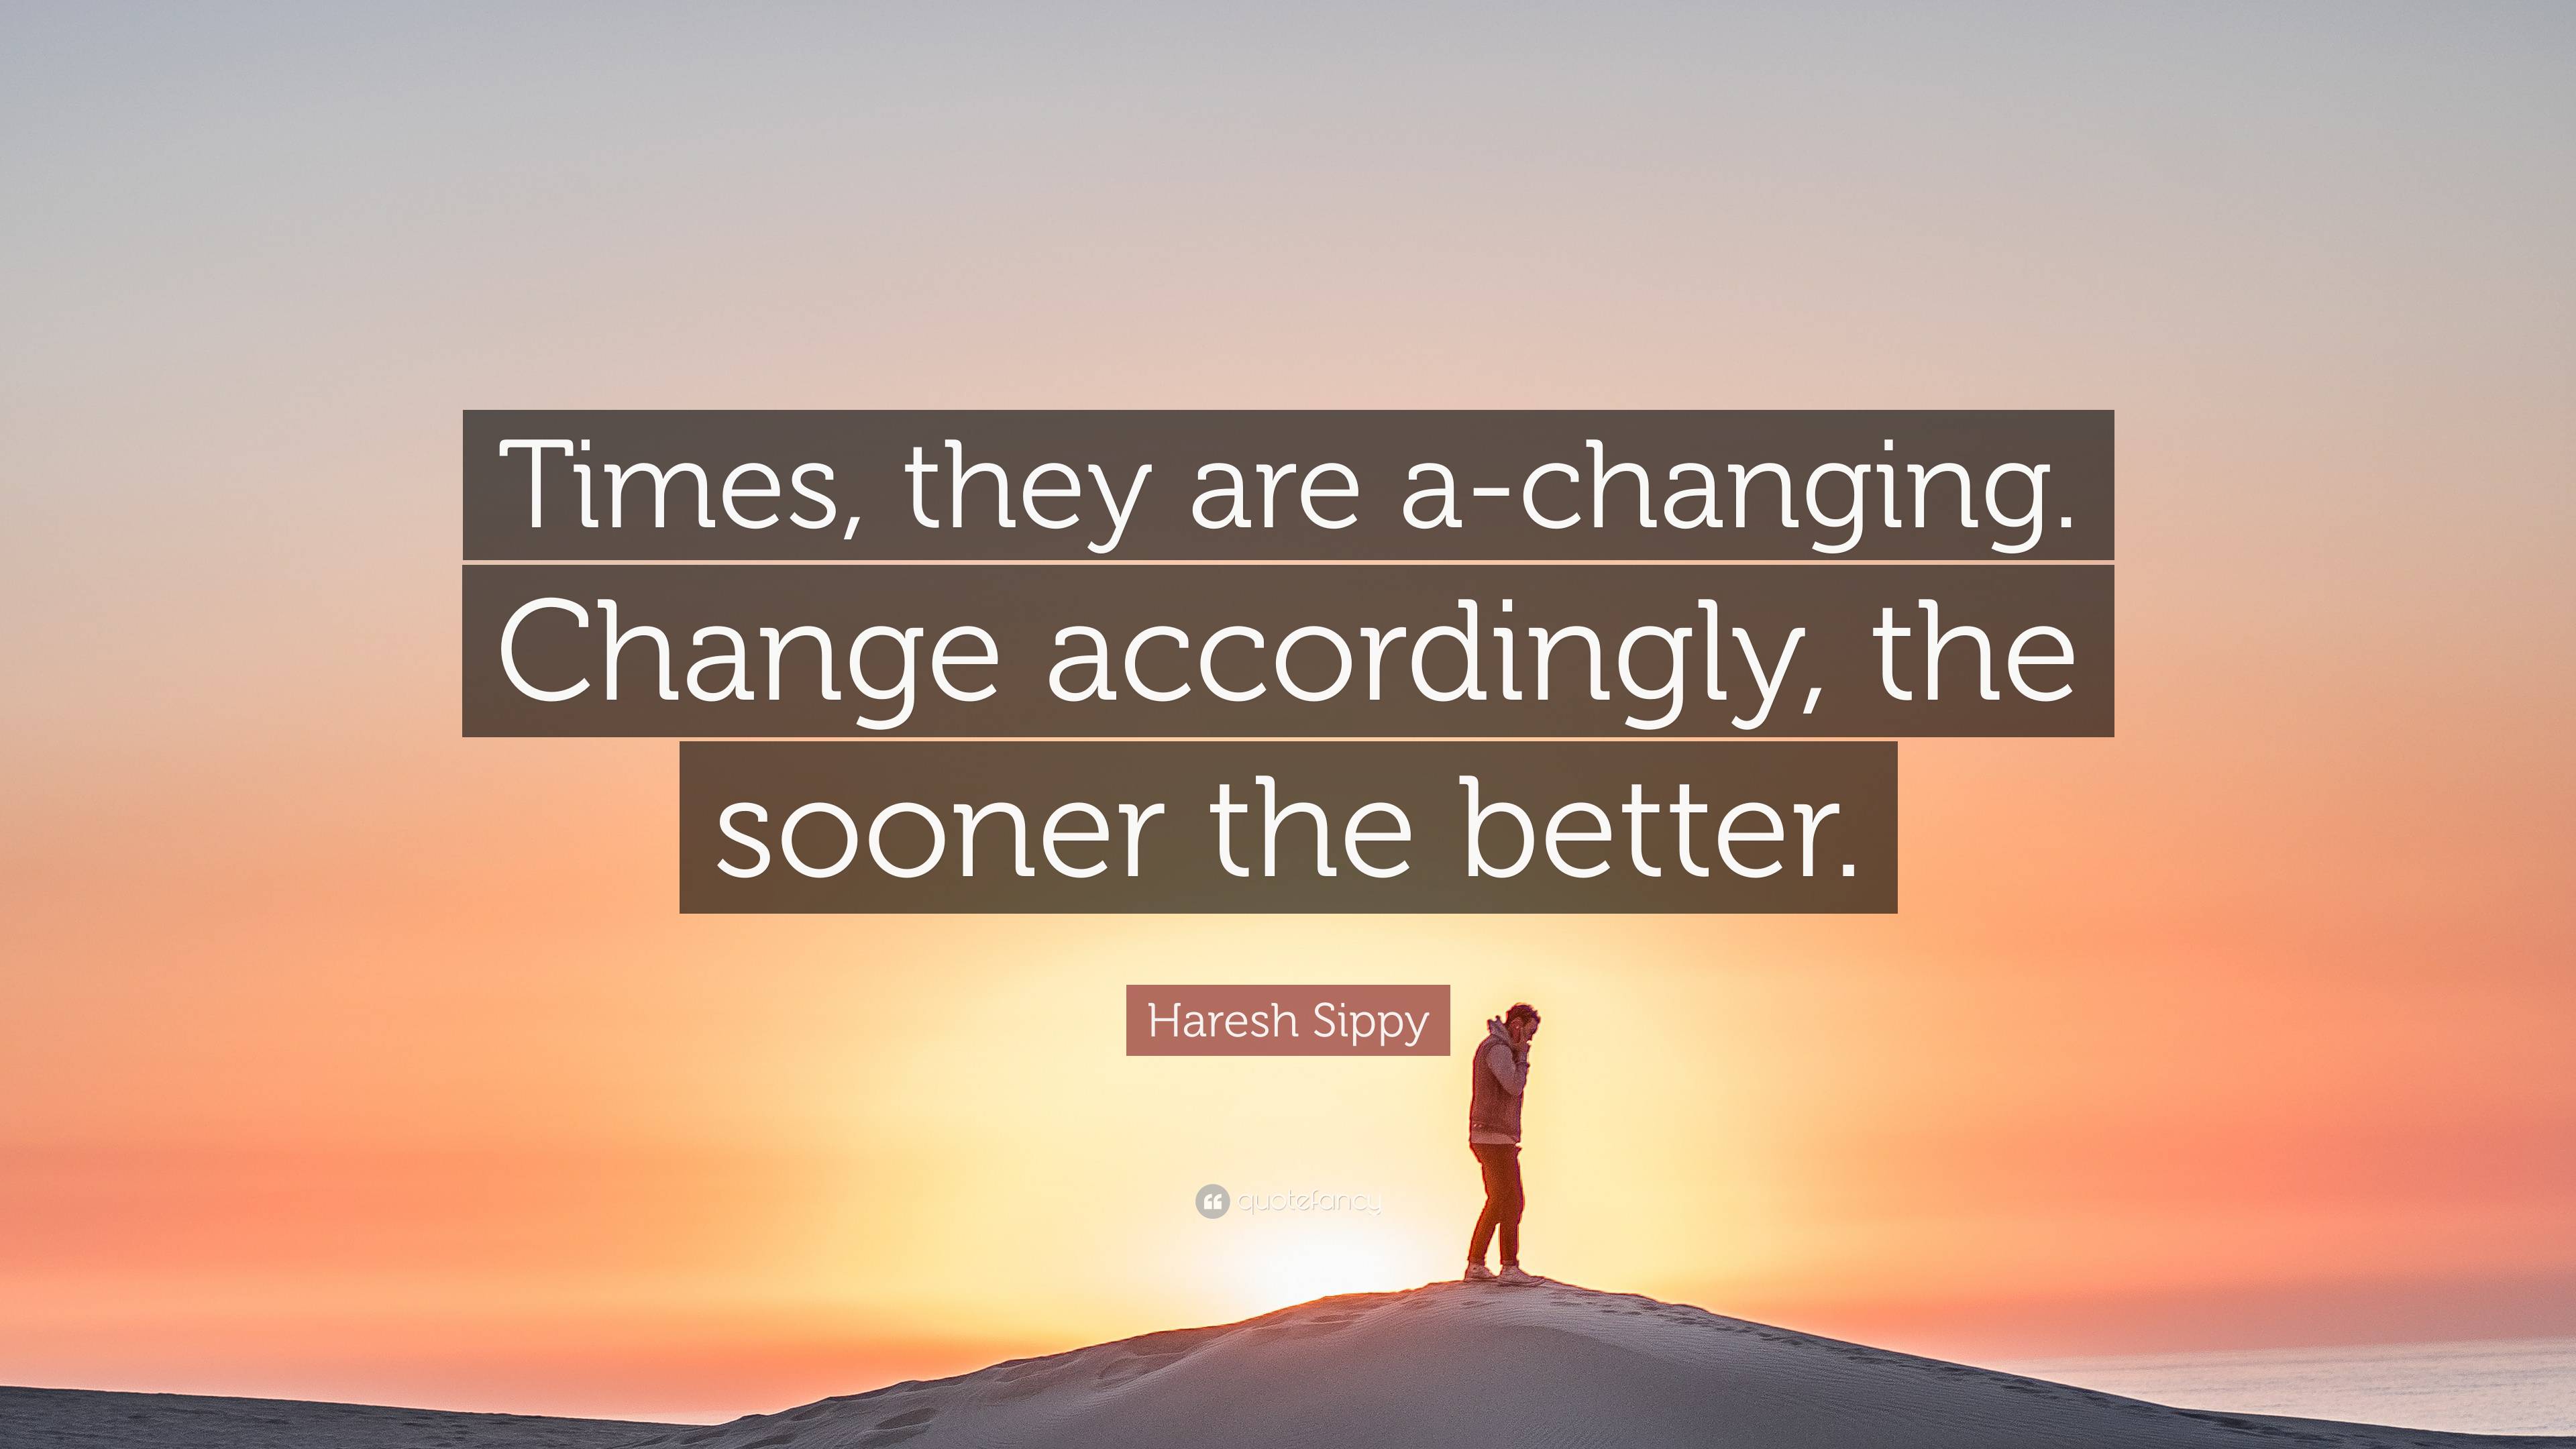 https://quotefancy.com/media/wallpaper/3840x2160/7484683-Haresh-Sippy-Quote-Times-they-are-a-changing-Change-accordingly.jpg